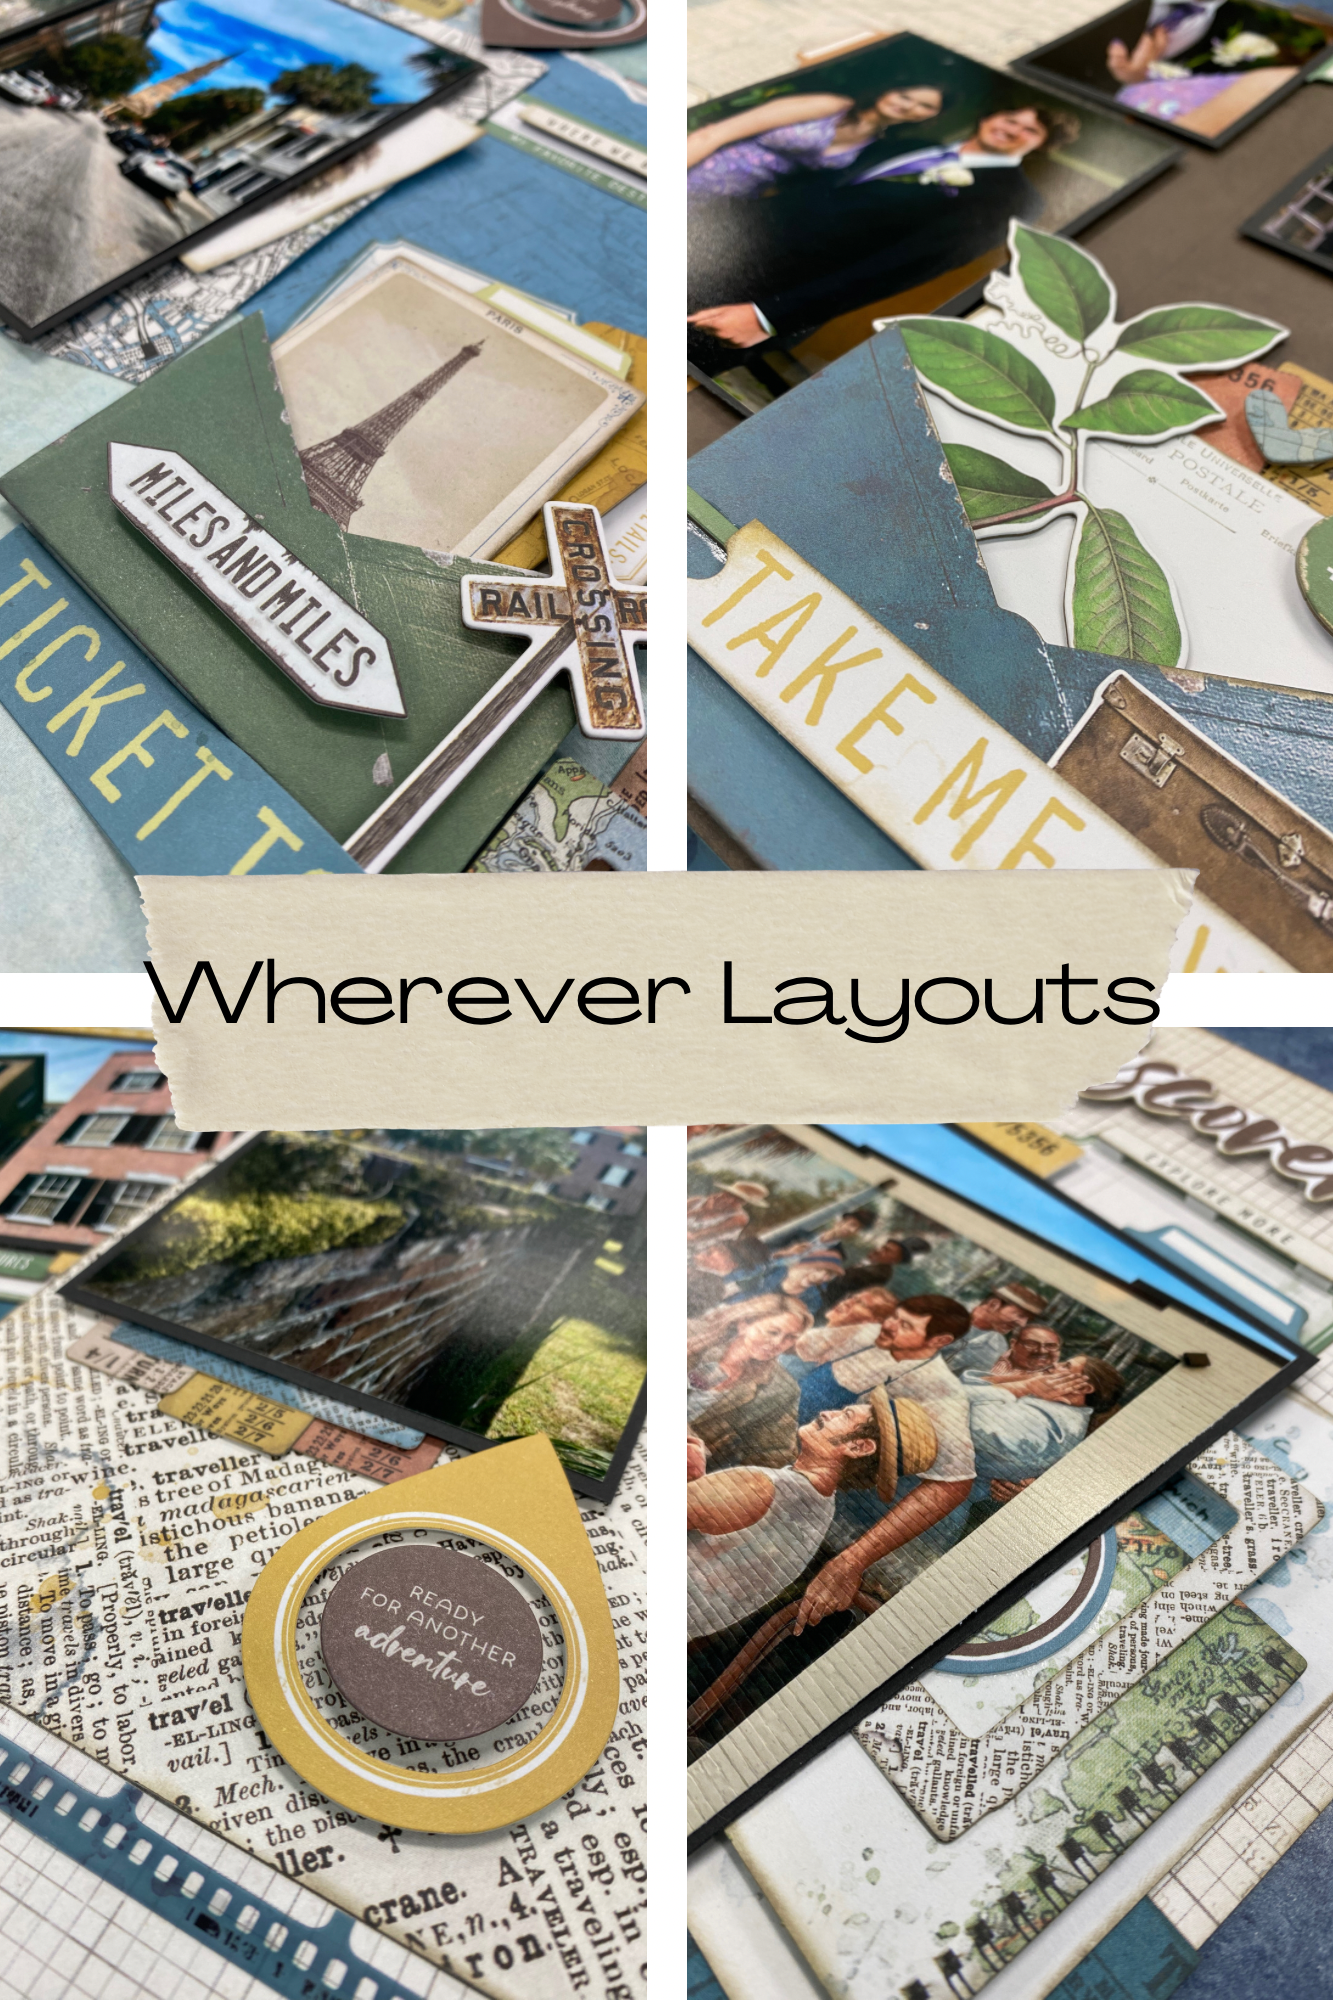 Wherever Layouts $50.00+tax